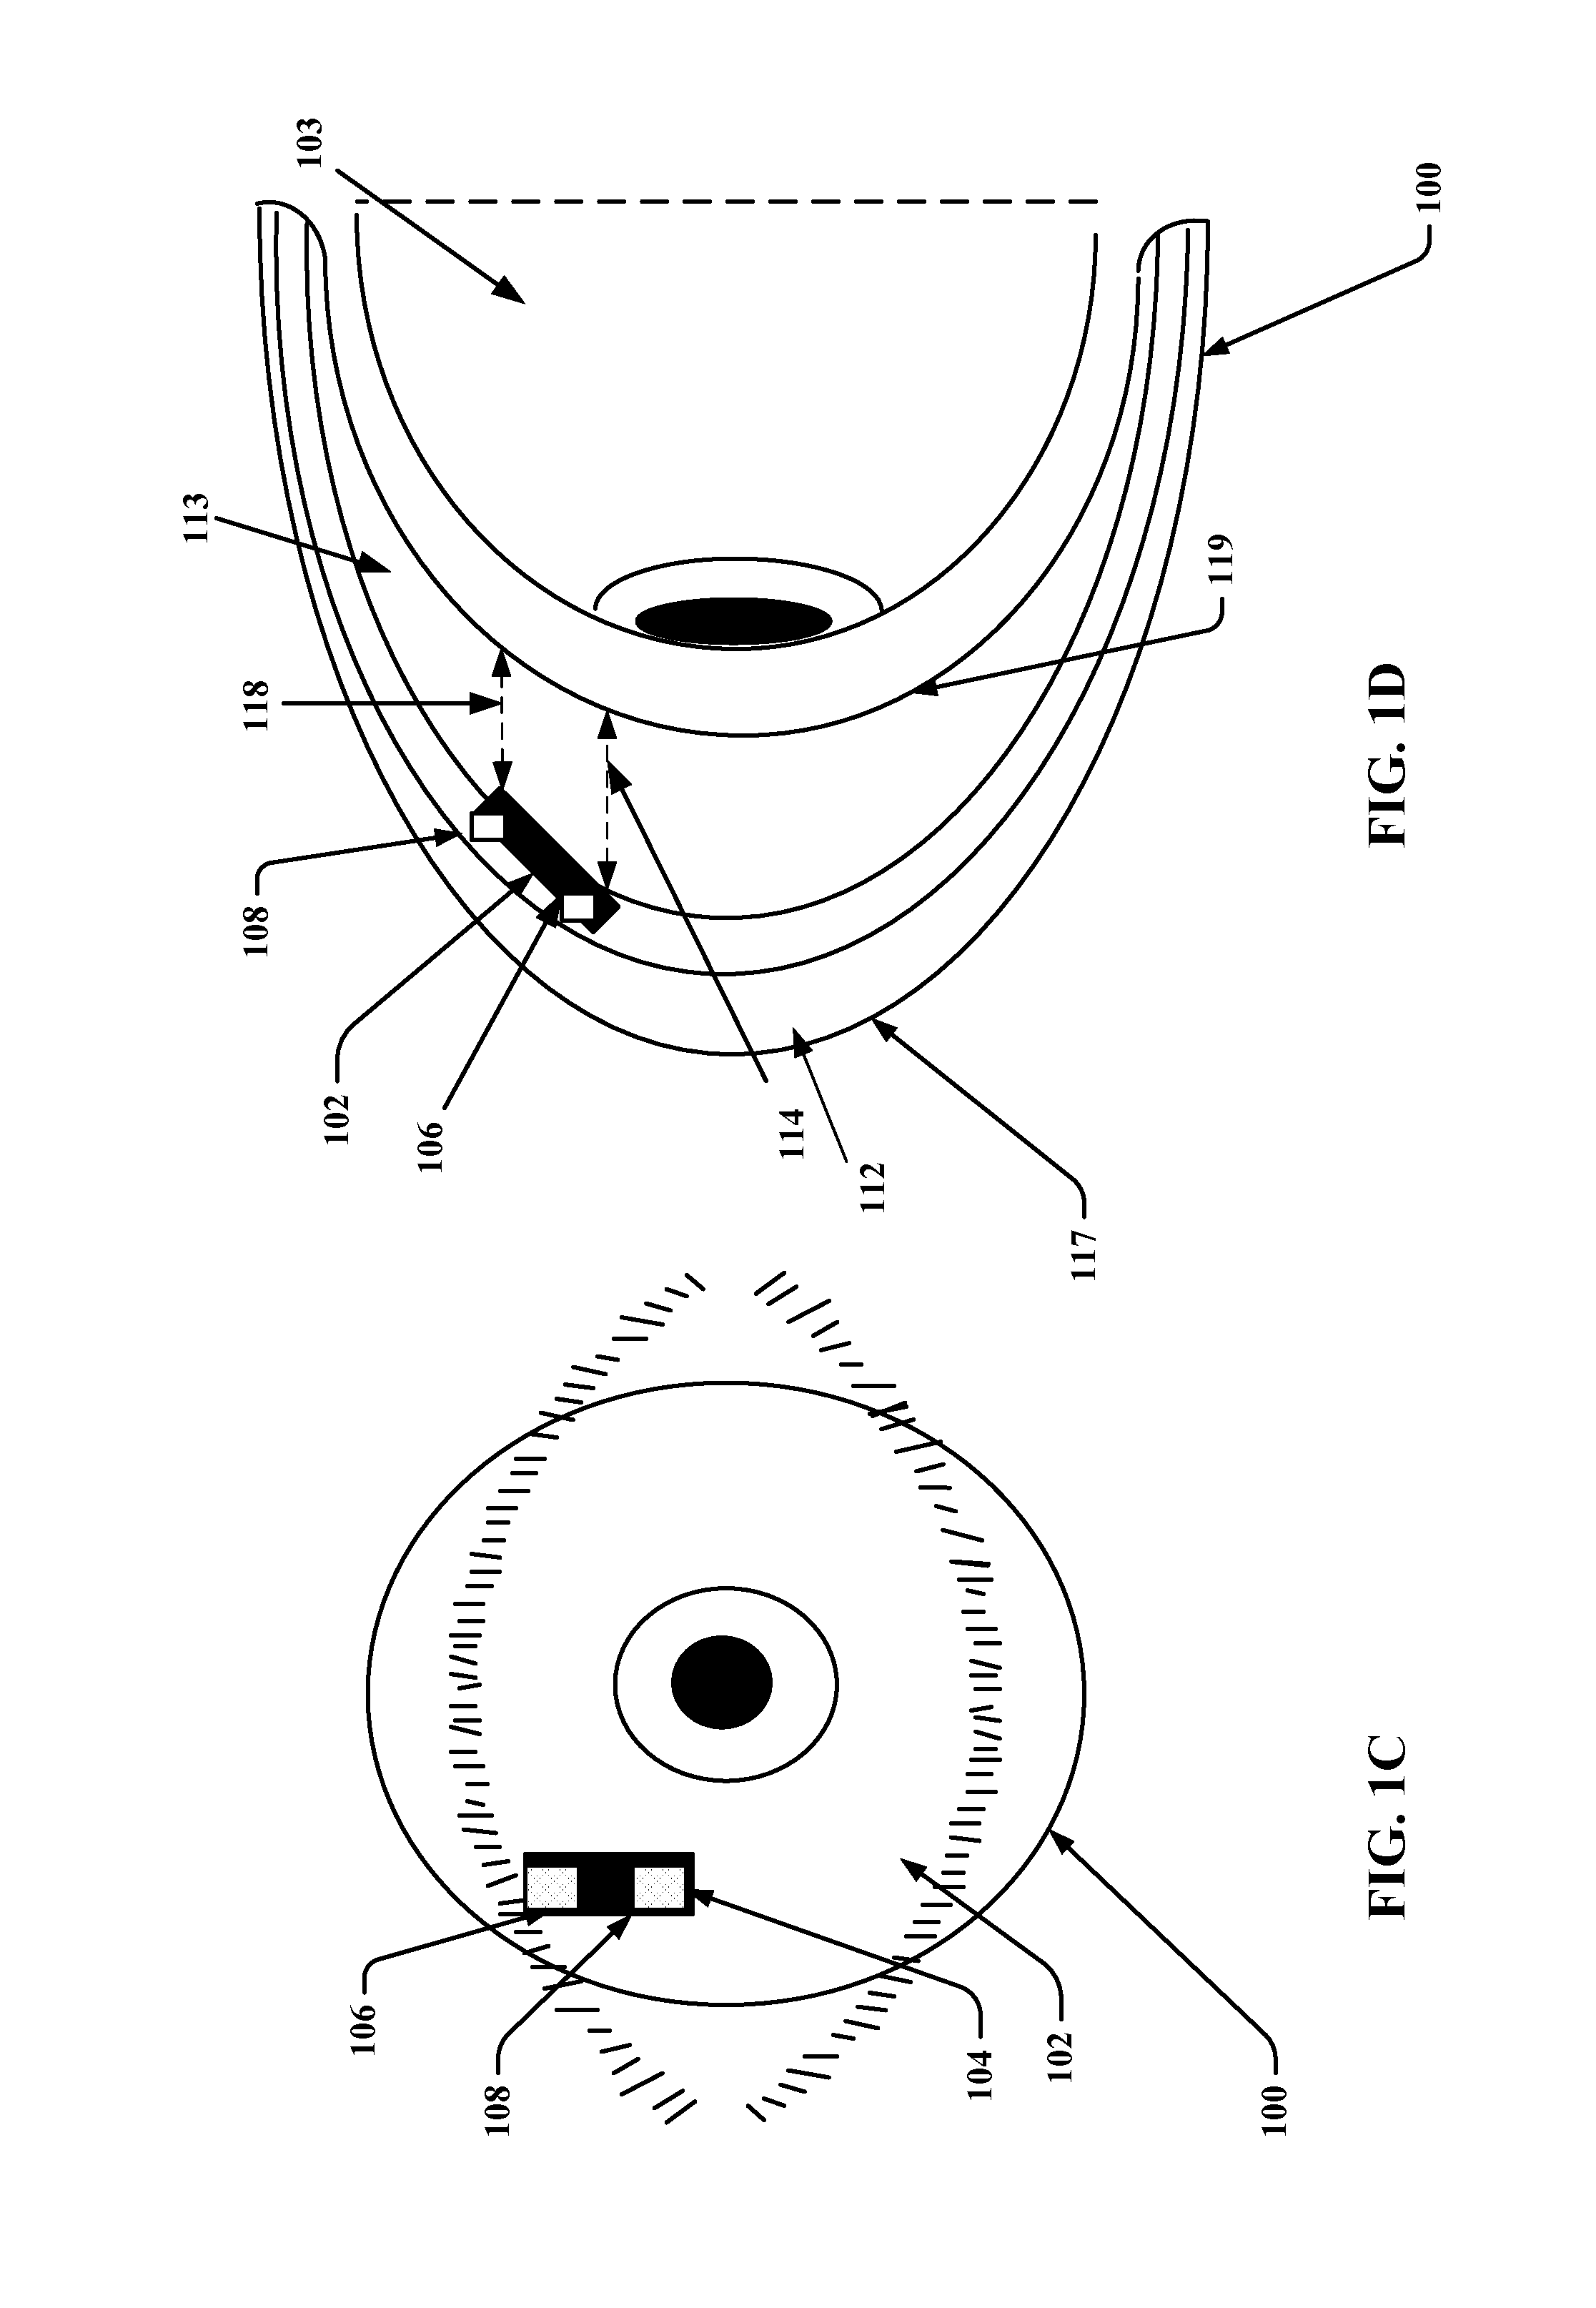 Contact lens and method of manufacture to improve sensor sensitivity